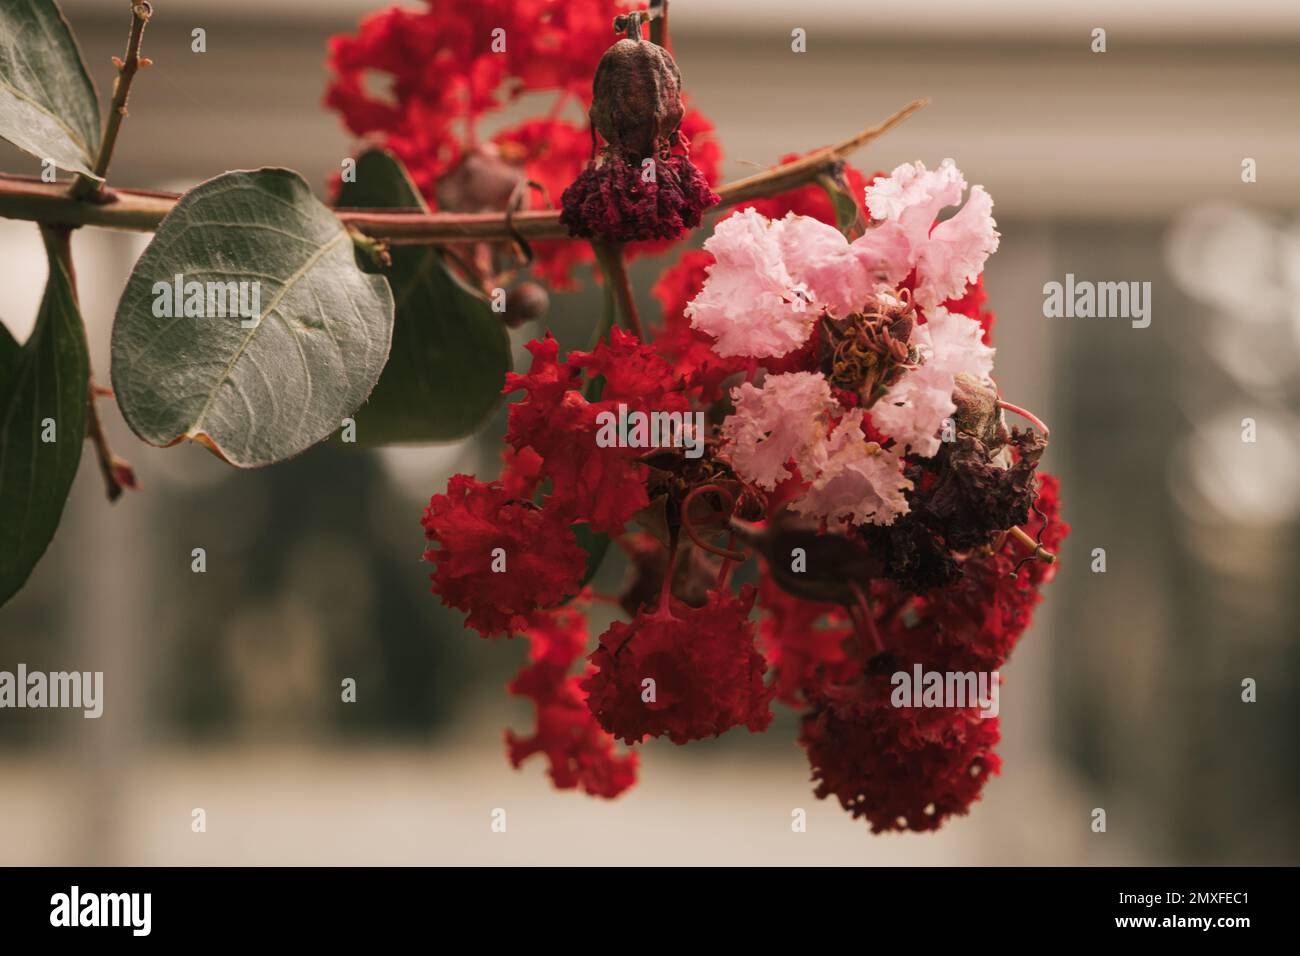 A soft focus of a bunch of red and pink crape myrtle flowers blooming on a tree Stock Photo